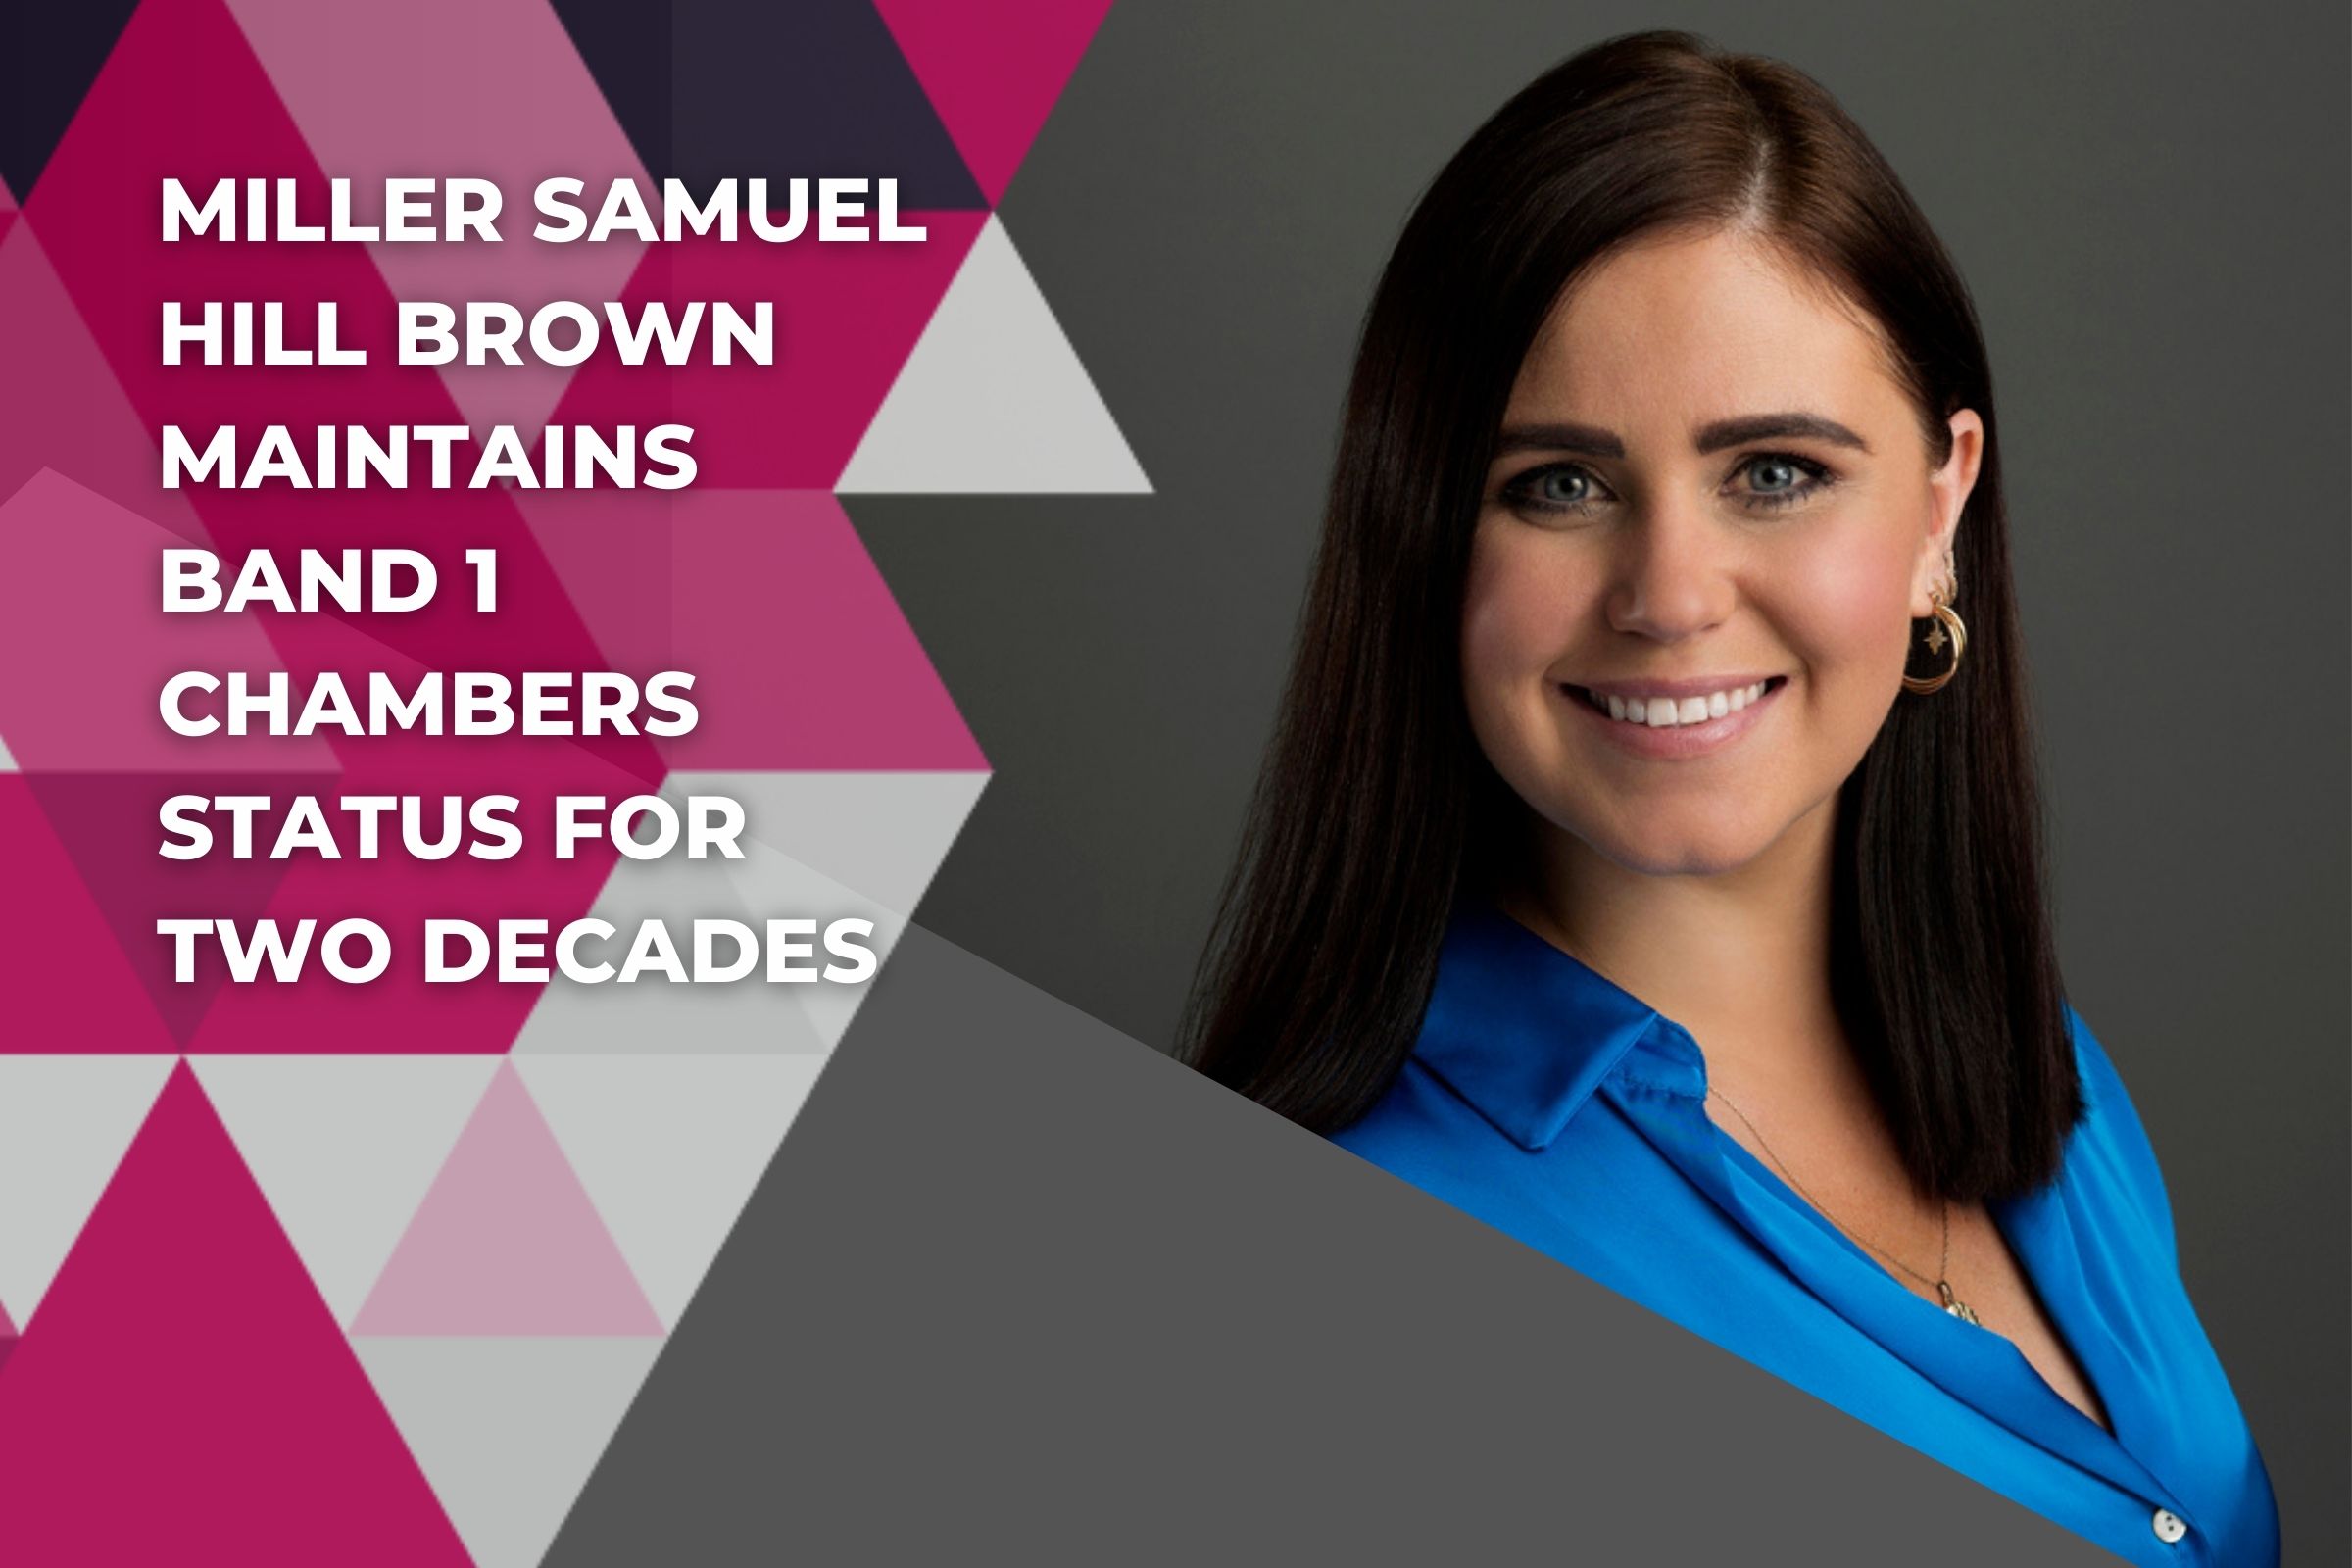 Miller Samuel Hill Brown Maintains Band 1 Chambers Status for Two Decades